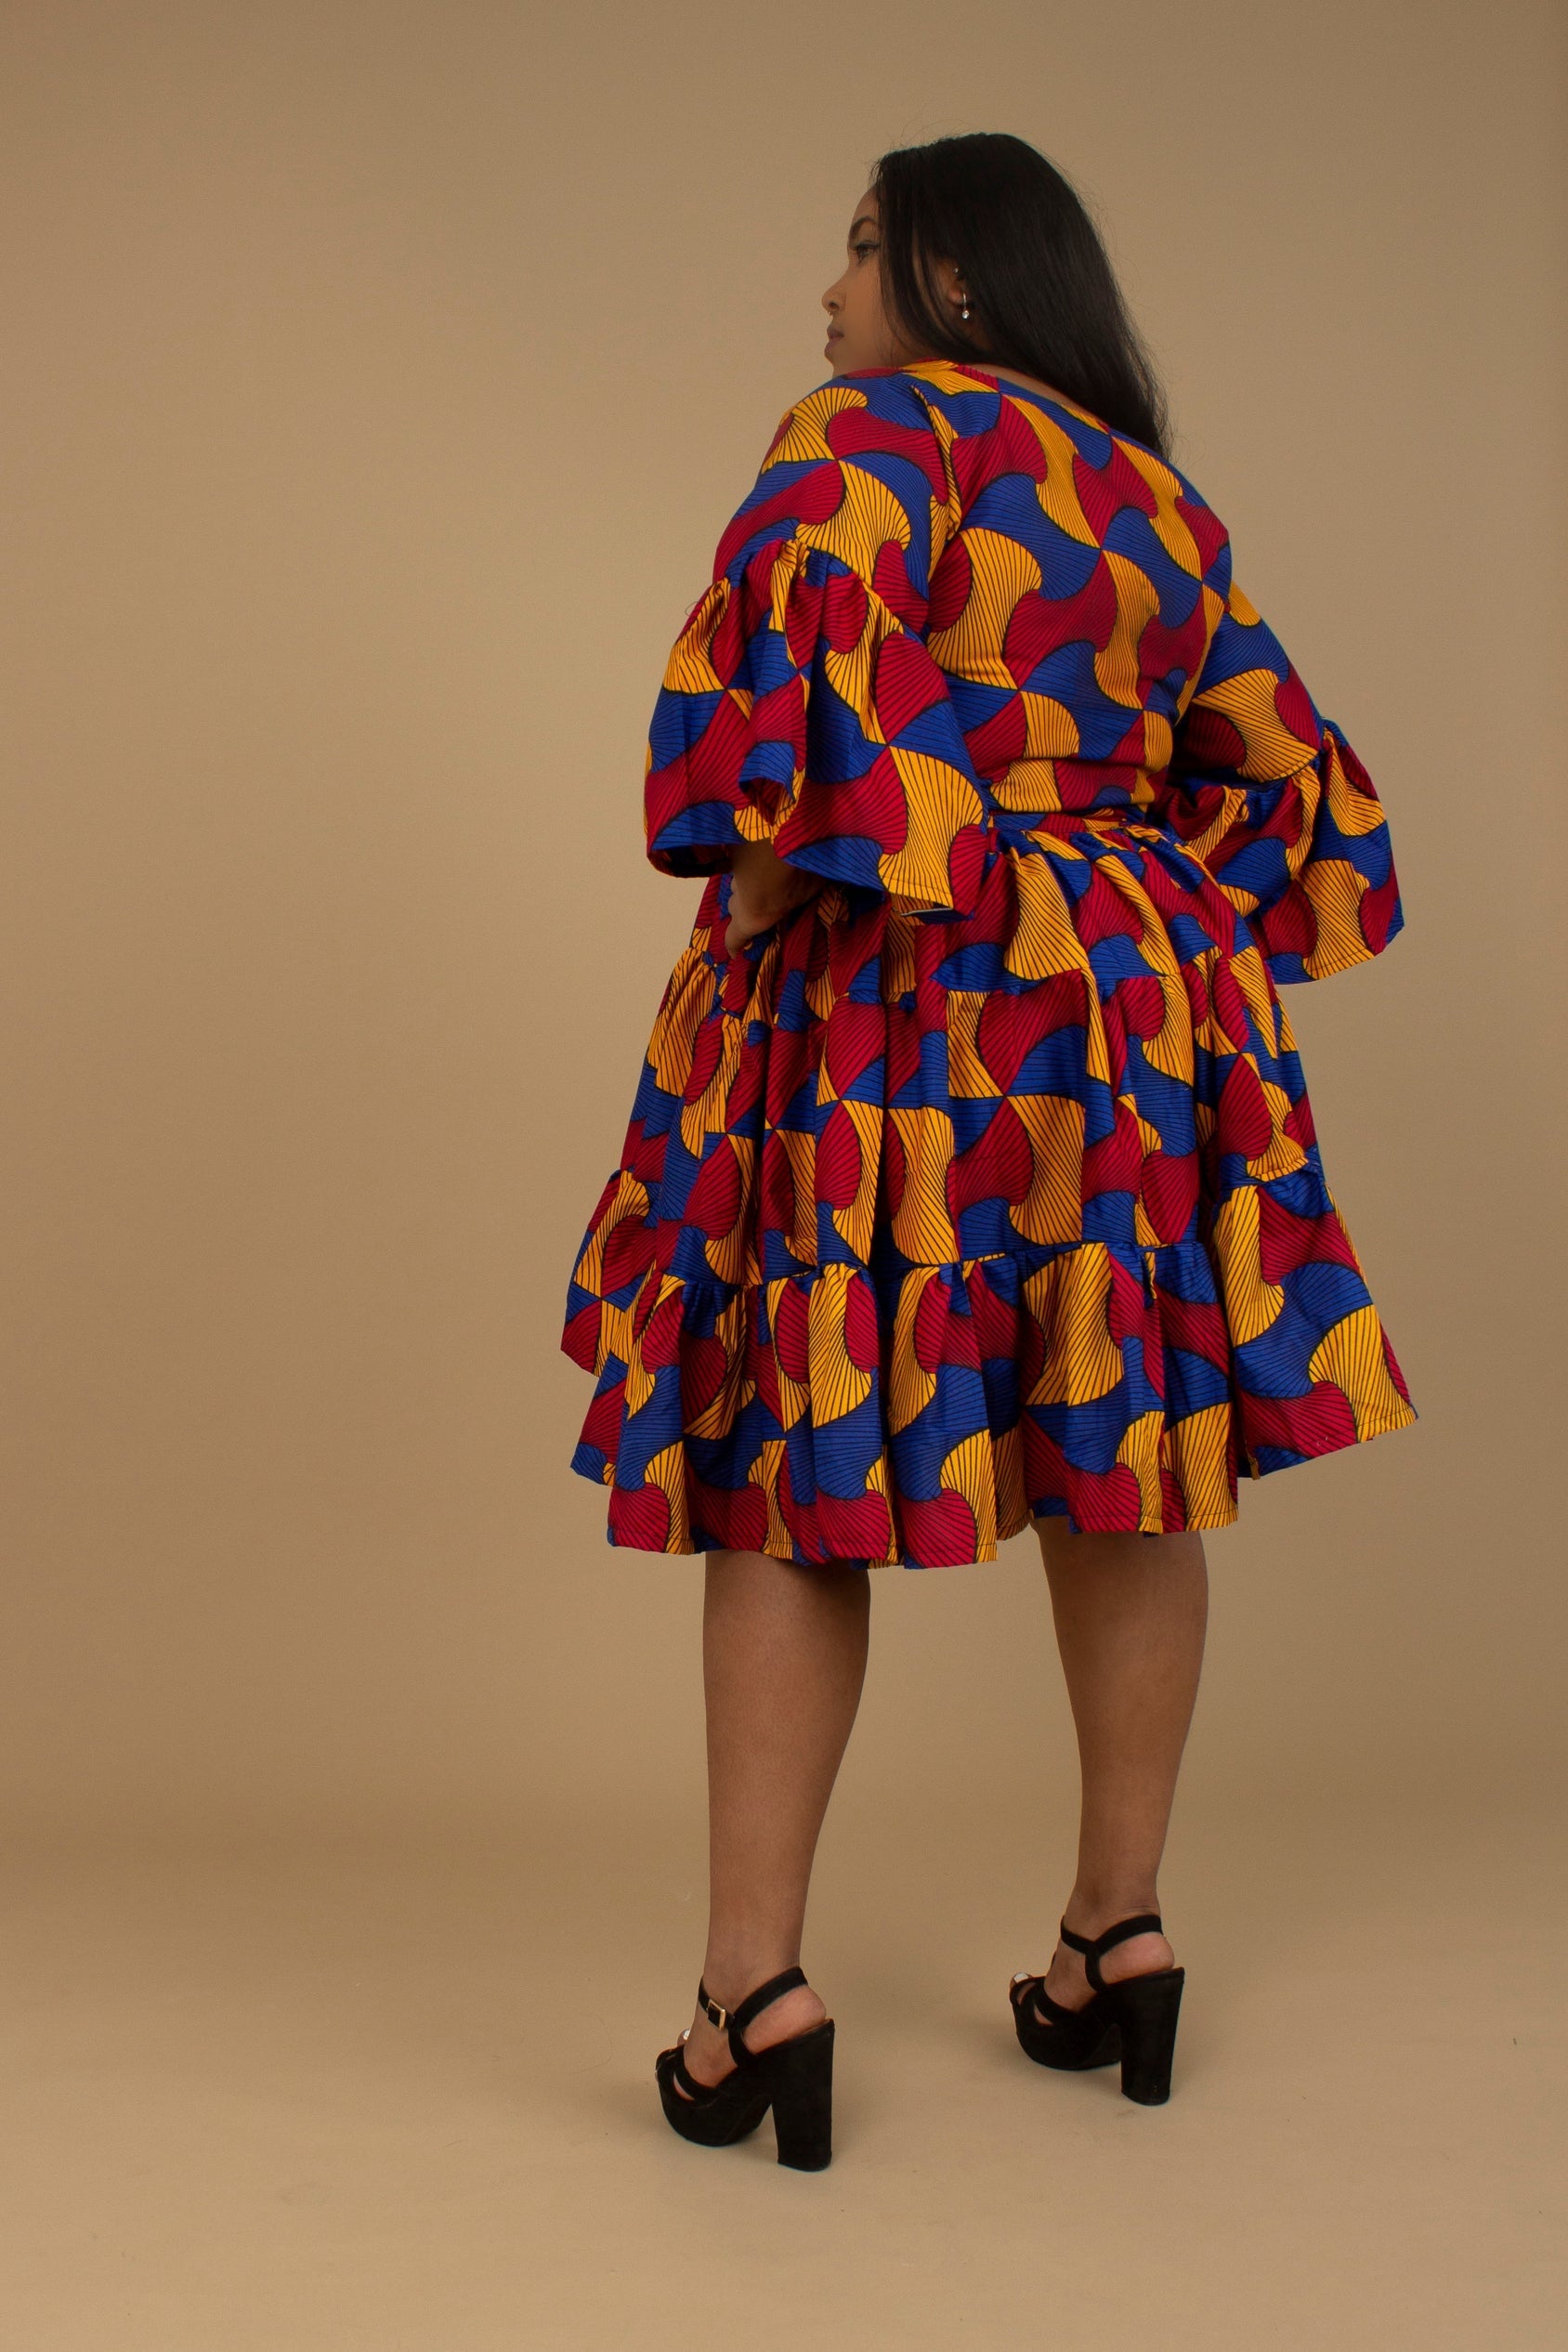 The Kano African Printed ruffled dress features an Ankara wax Print Belted Trim in a gorgeous blue, red and yellow multi-colored swirling geometric African Print pattern on sustainable cotton. Designed in England Made in Nigeria, Available in standard and plus sizes (UK 8-32). 